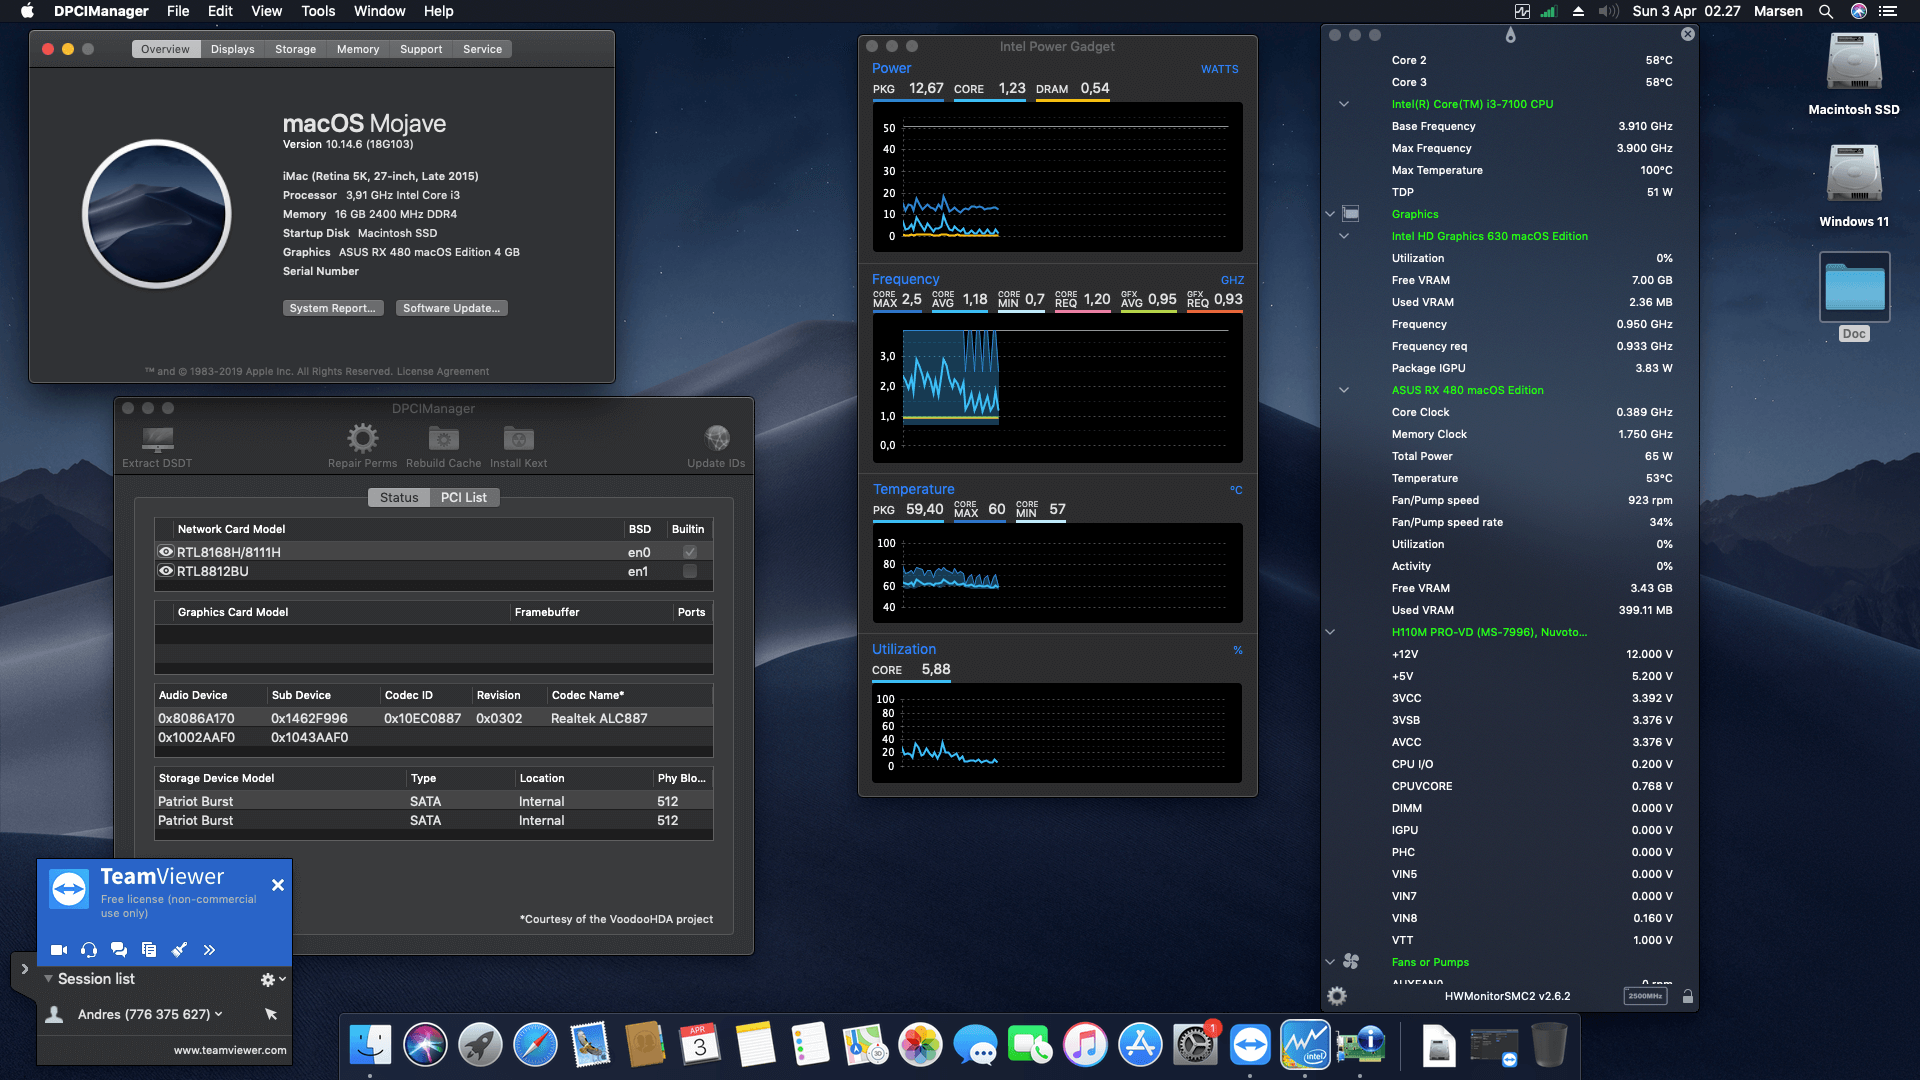 Success Hackintosh macOS Mojave 10.14.6 Build 18G103 in MSI H110M PRO-VD + Intel Core i3 7100 + Asus RX 480